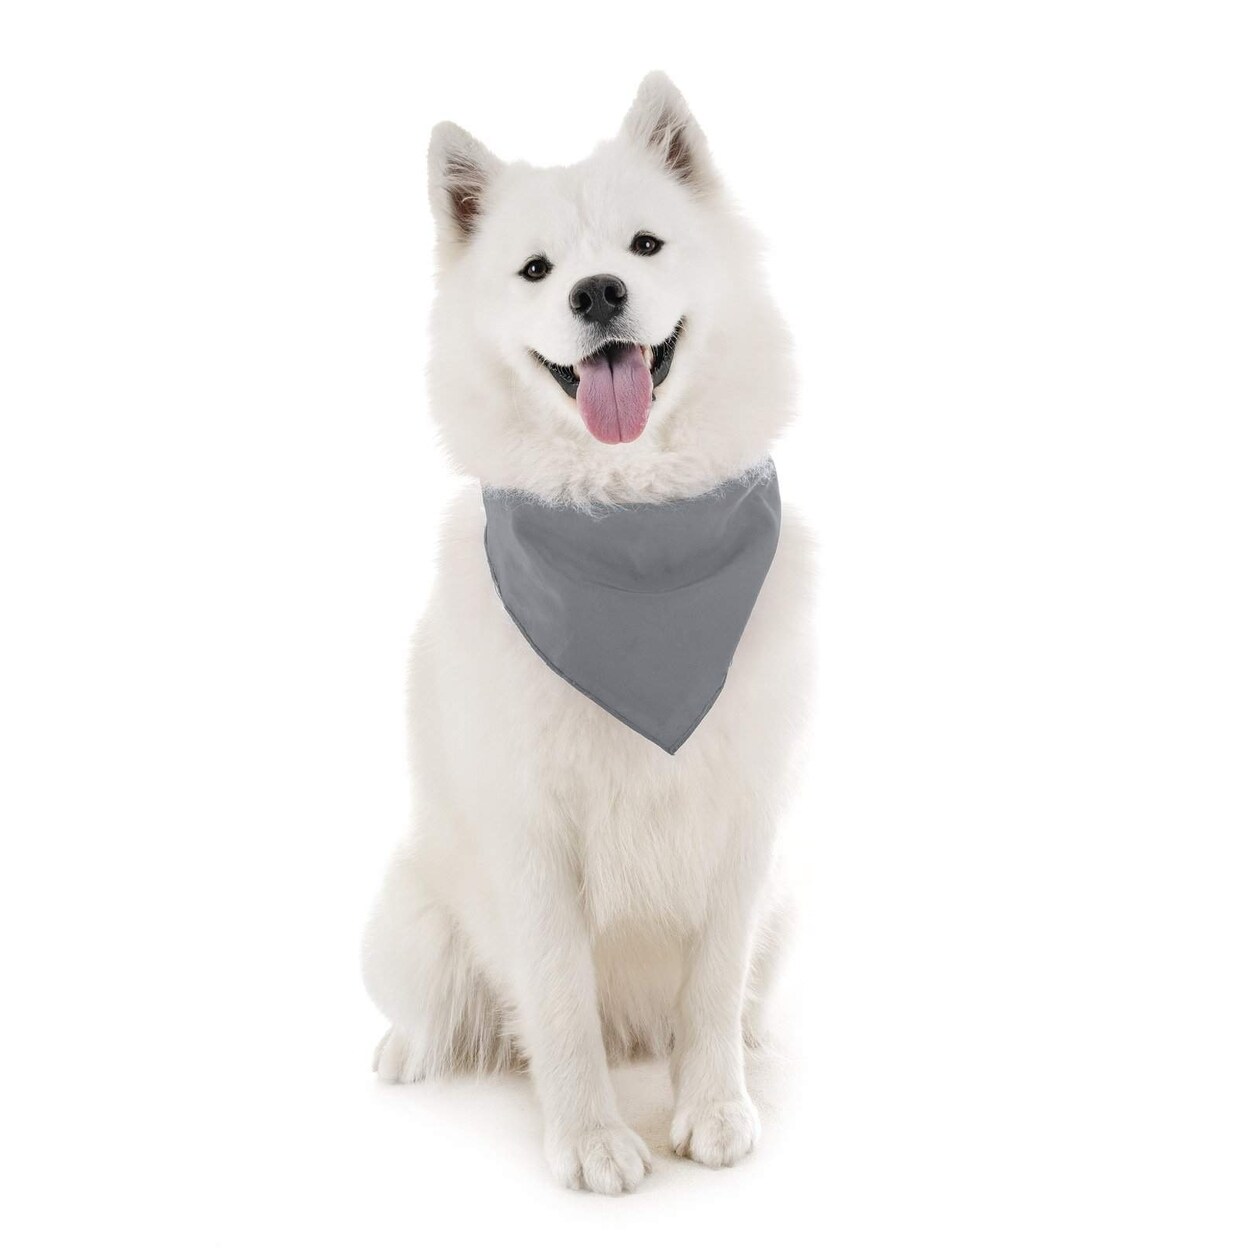 Qraftsy   Dog Bandana Scarf Triangle Bibs for Any Size Puppies Dogs and Cats